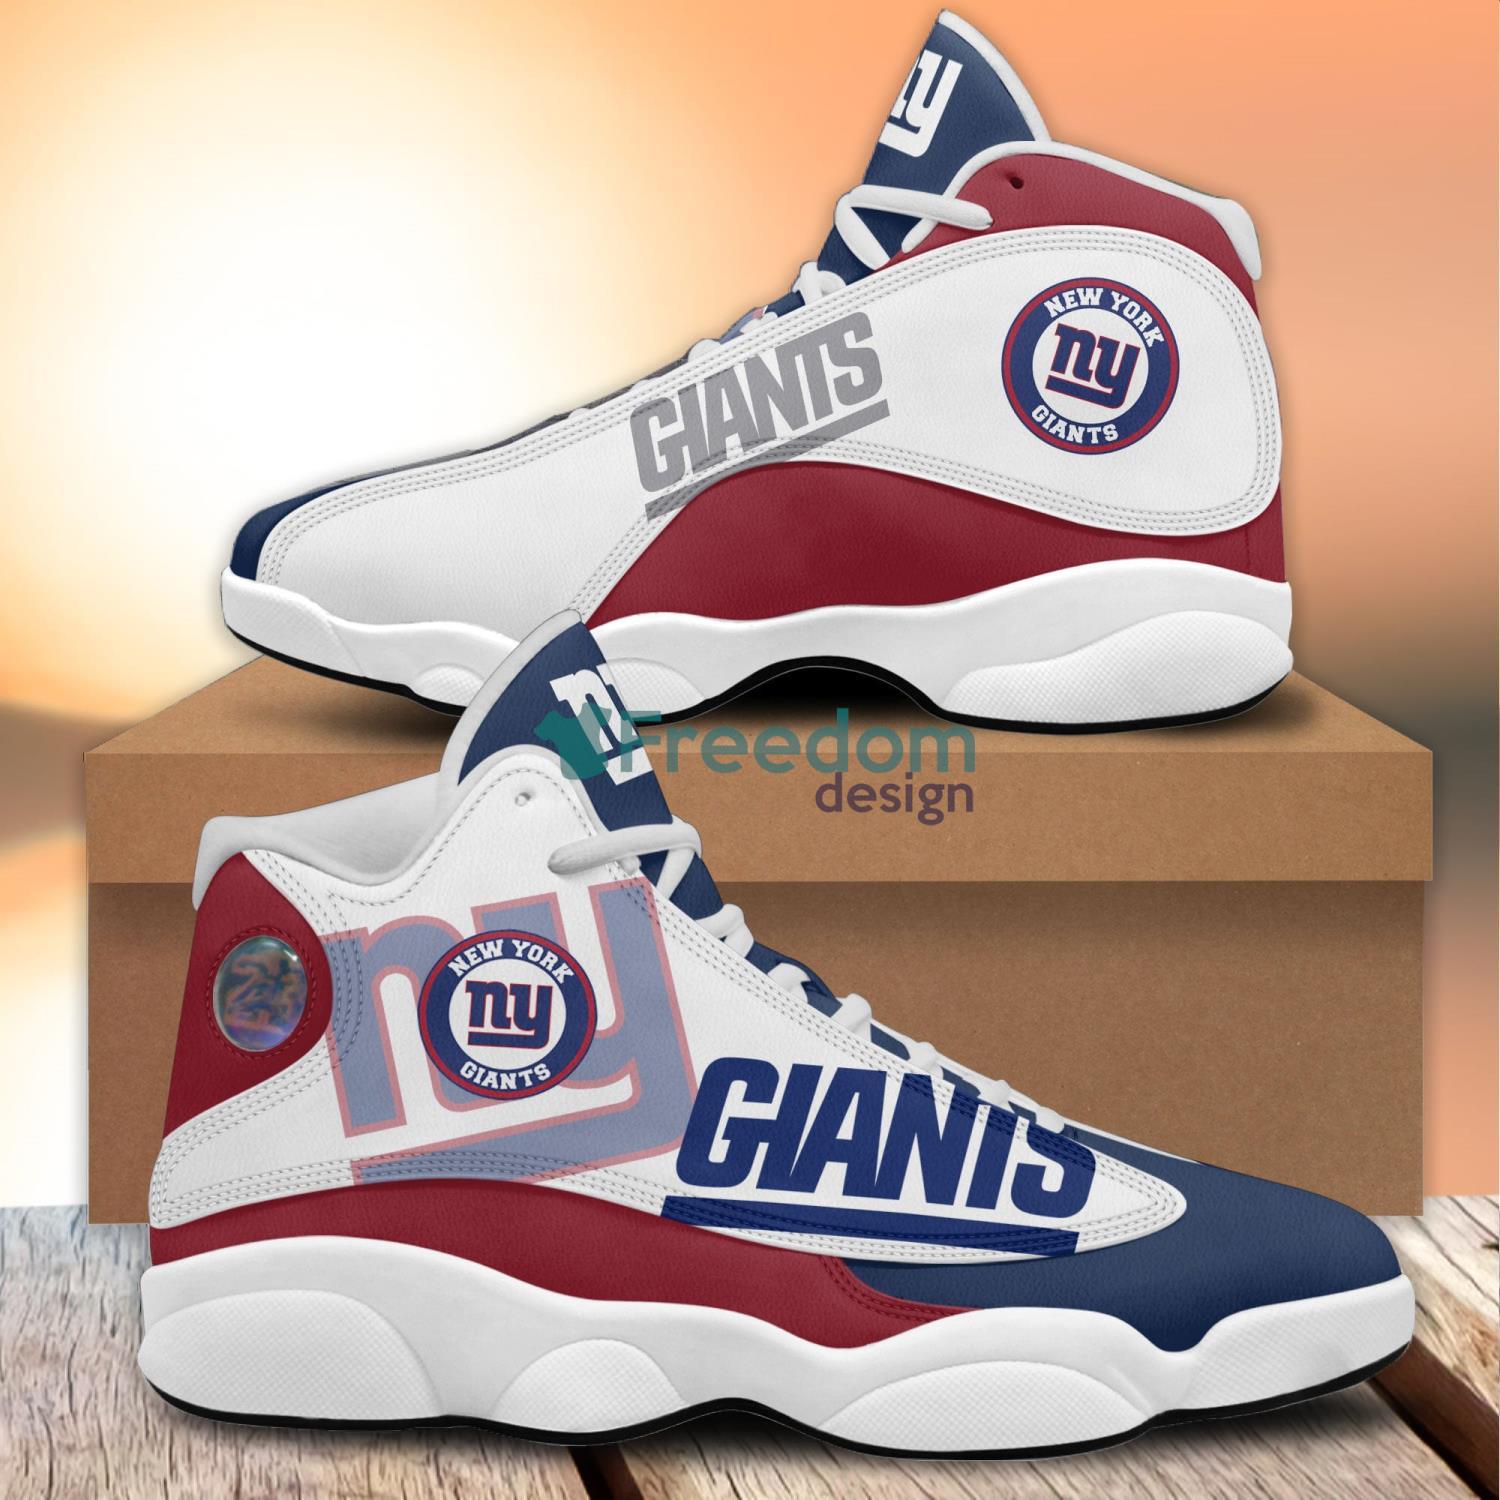 New York Giants NY Shoes Sneakers Air Jordan 13 For Fans Product Photo 1